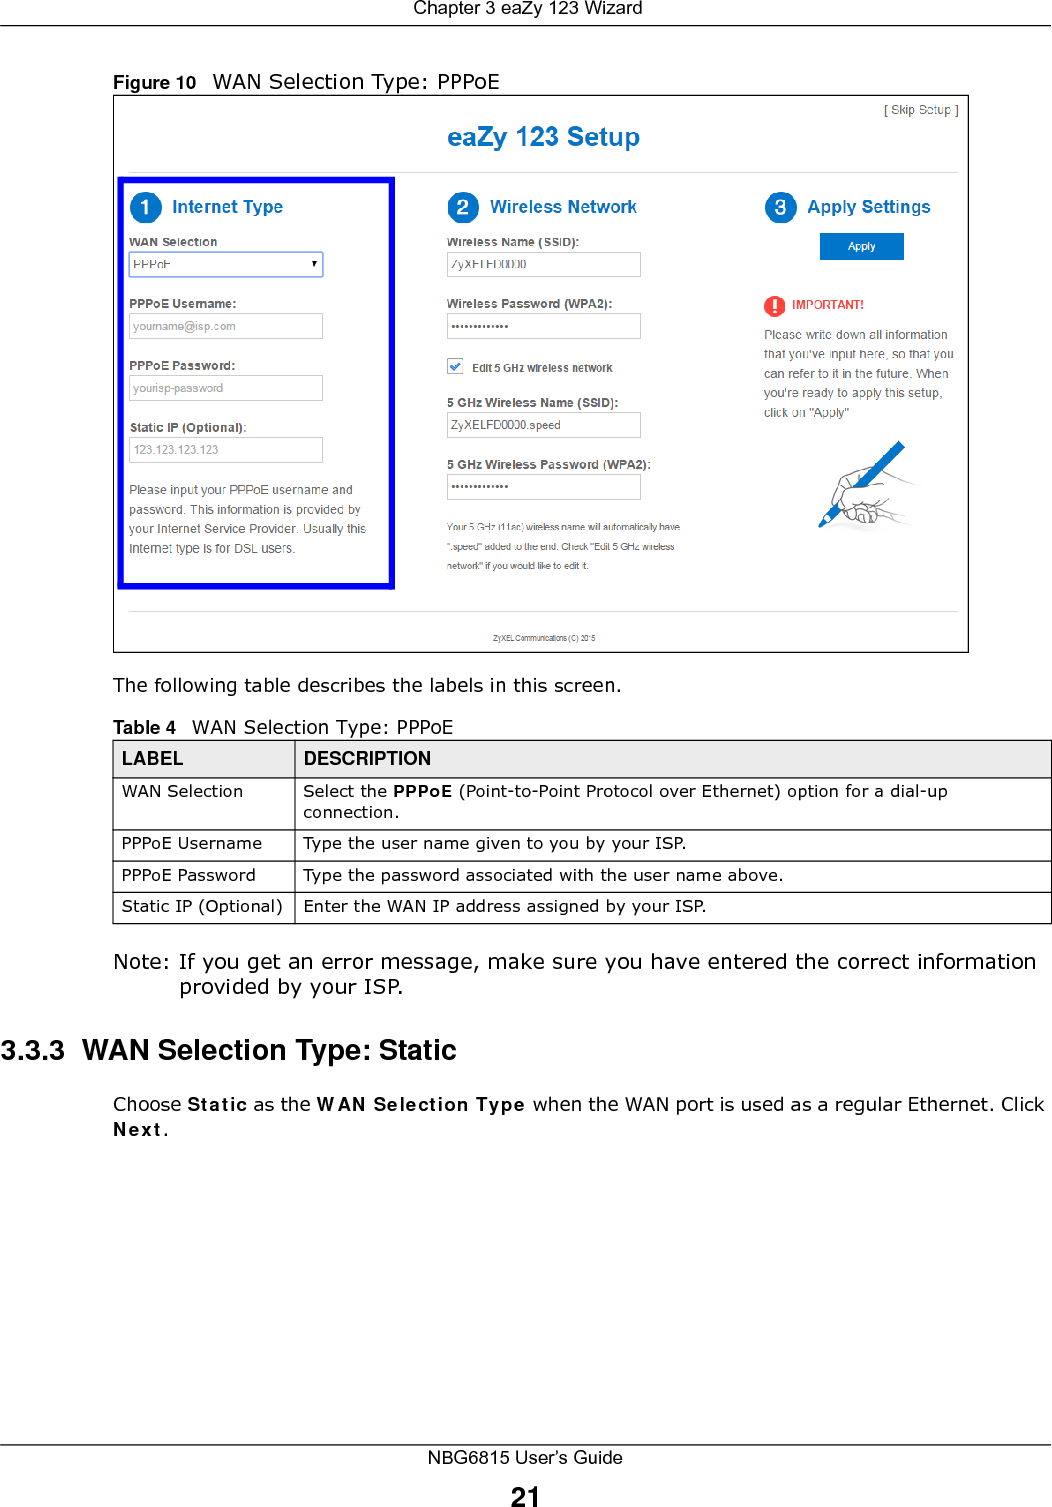  Chapter 3 eaZy 123 WizardNBG6815 User’s Guide21Figure 10   WAN Selection Type: PPPoE The following table describes the labels in this screen.Note: If you get an error message, make sure you have entered the correct information provided by your ISP. 3.3.3  WAN Selection Type: StaticChoose Static as the WAN Selection Type when the WAN port is used as a regular Ethernet. Click Next.Table 4   WAN Selection Type: PPPoELABEL DESCRIPTIONWAN Selection Select the PPPoE (Point-to-Point Protocol over Ethernet) option for a dial-up connection.PPPoE Username Type the user name given to you by your ISP. PPPoE Password  Type the password associated with the user name above.Static IP (Optional) Enter the WAN IP address assigned by your ISP.